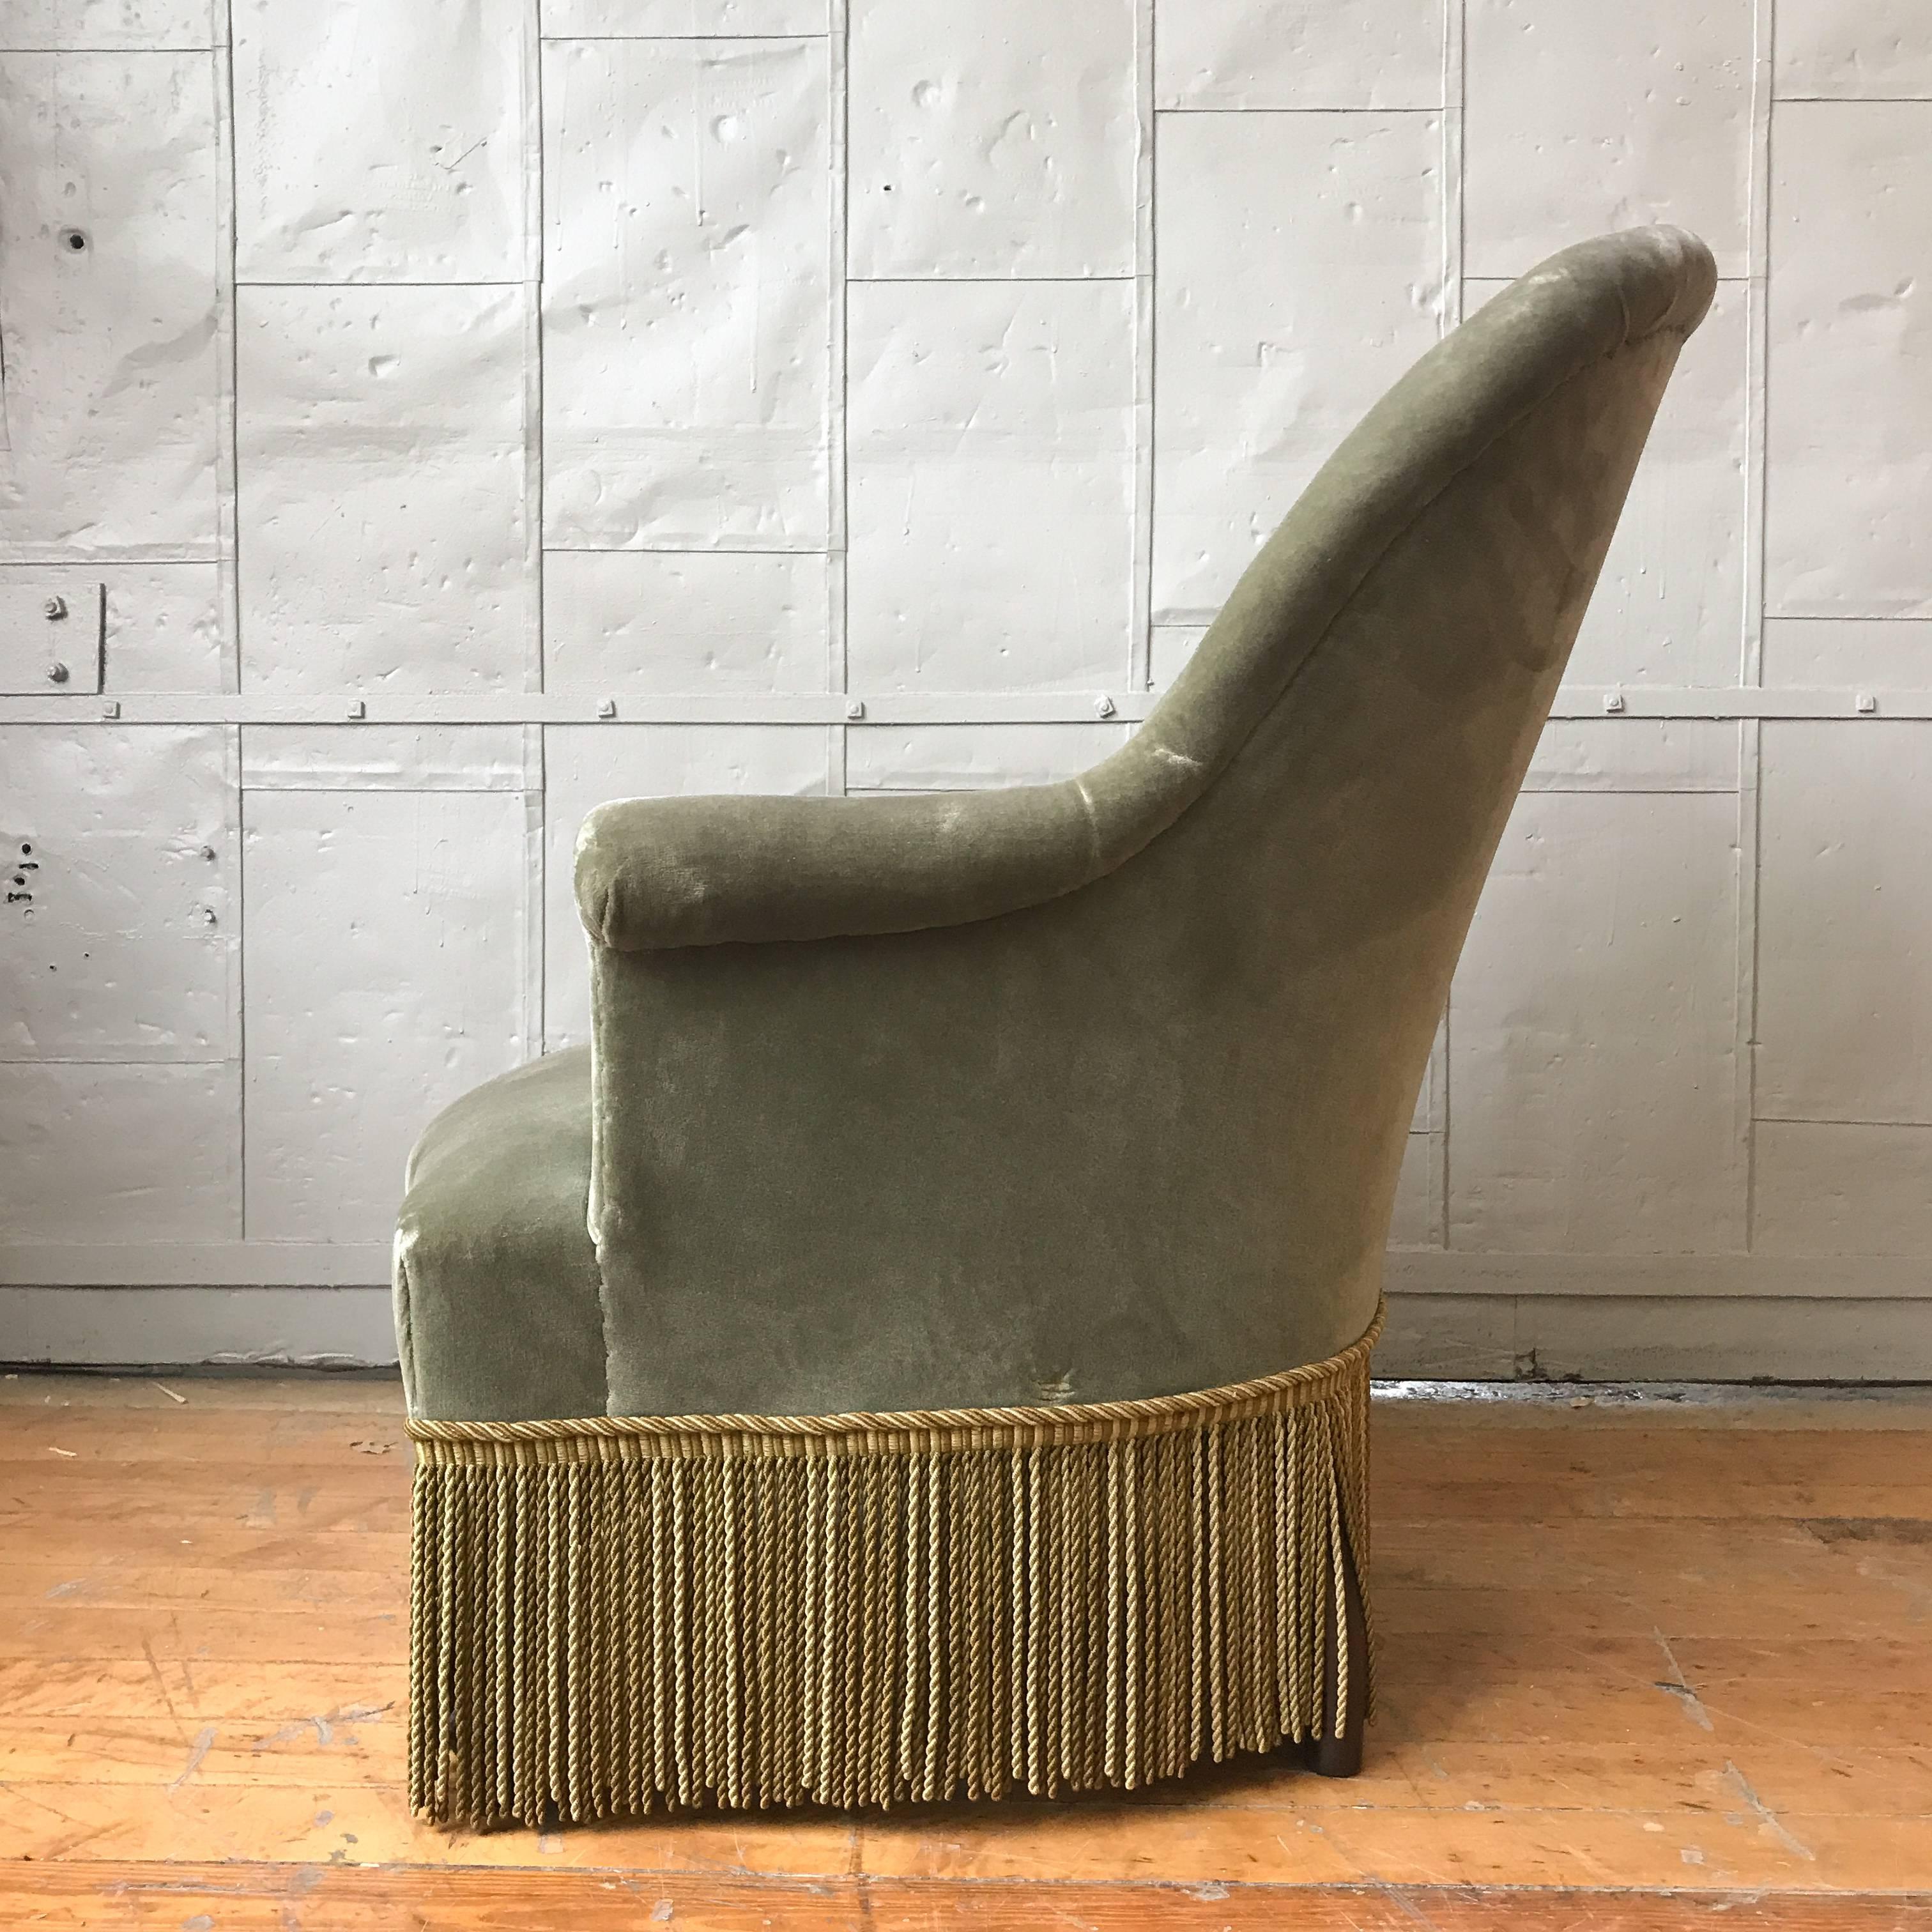 Pair of French Nap III armchairs in sage green velvet with fringe.